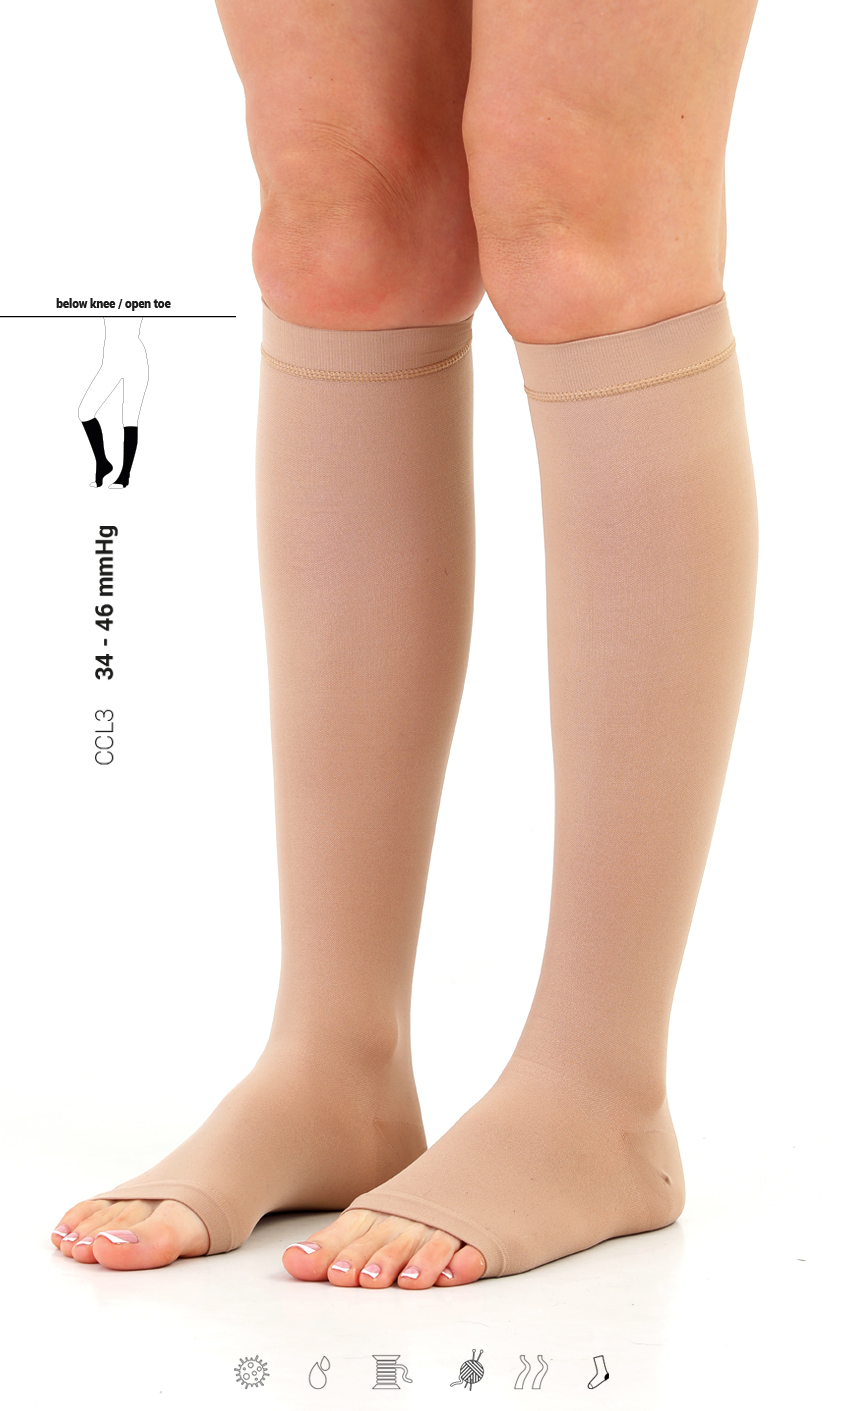 COMPRESSION STOCKING BELOW THE KNEE (OPEN TOE) CCL3